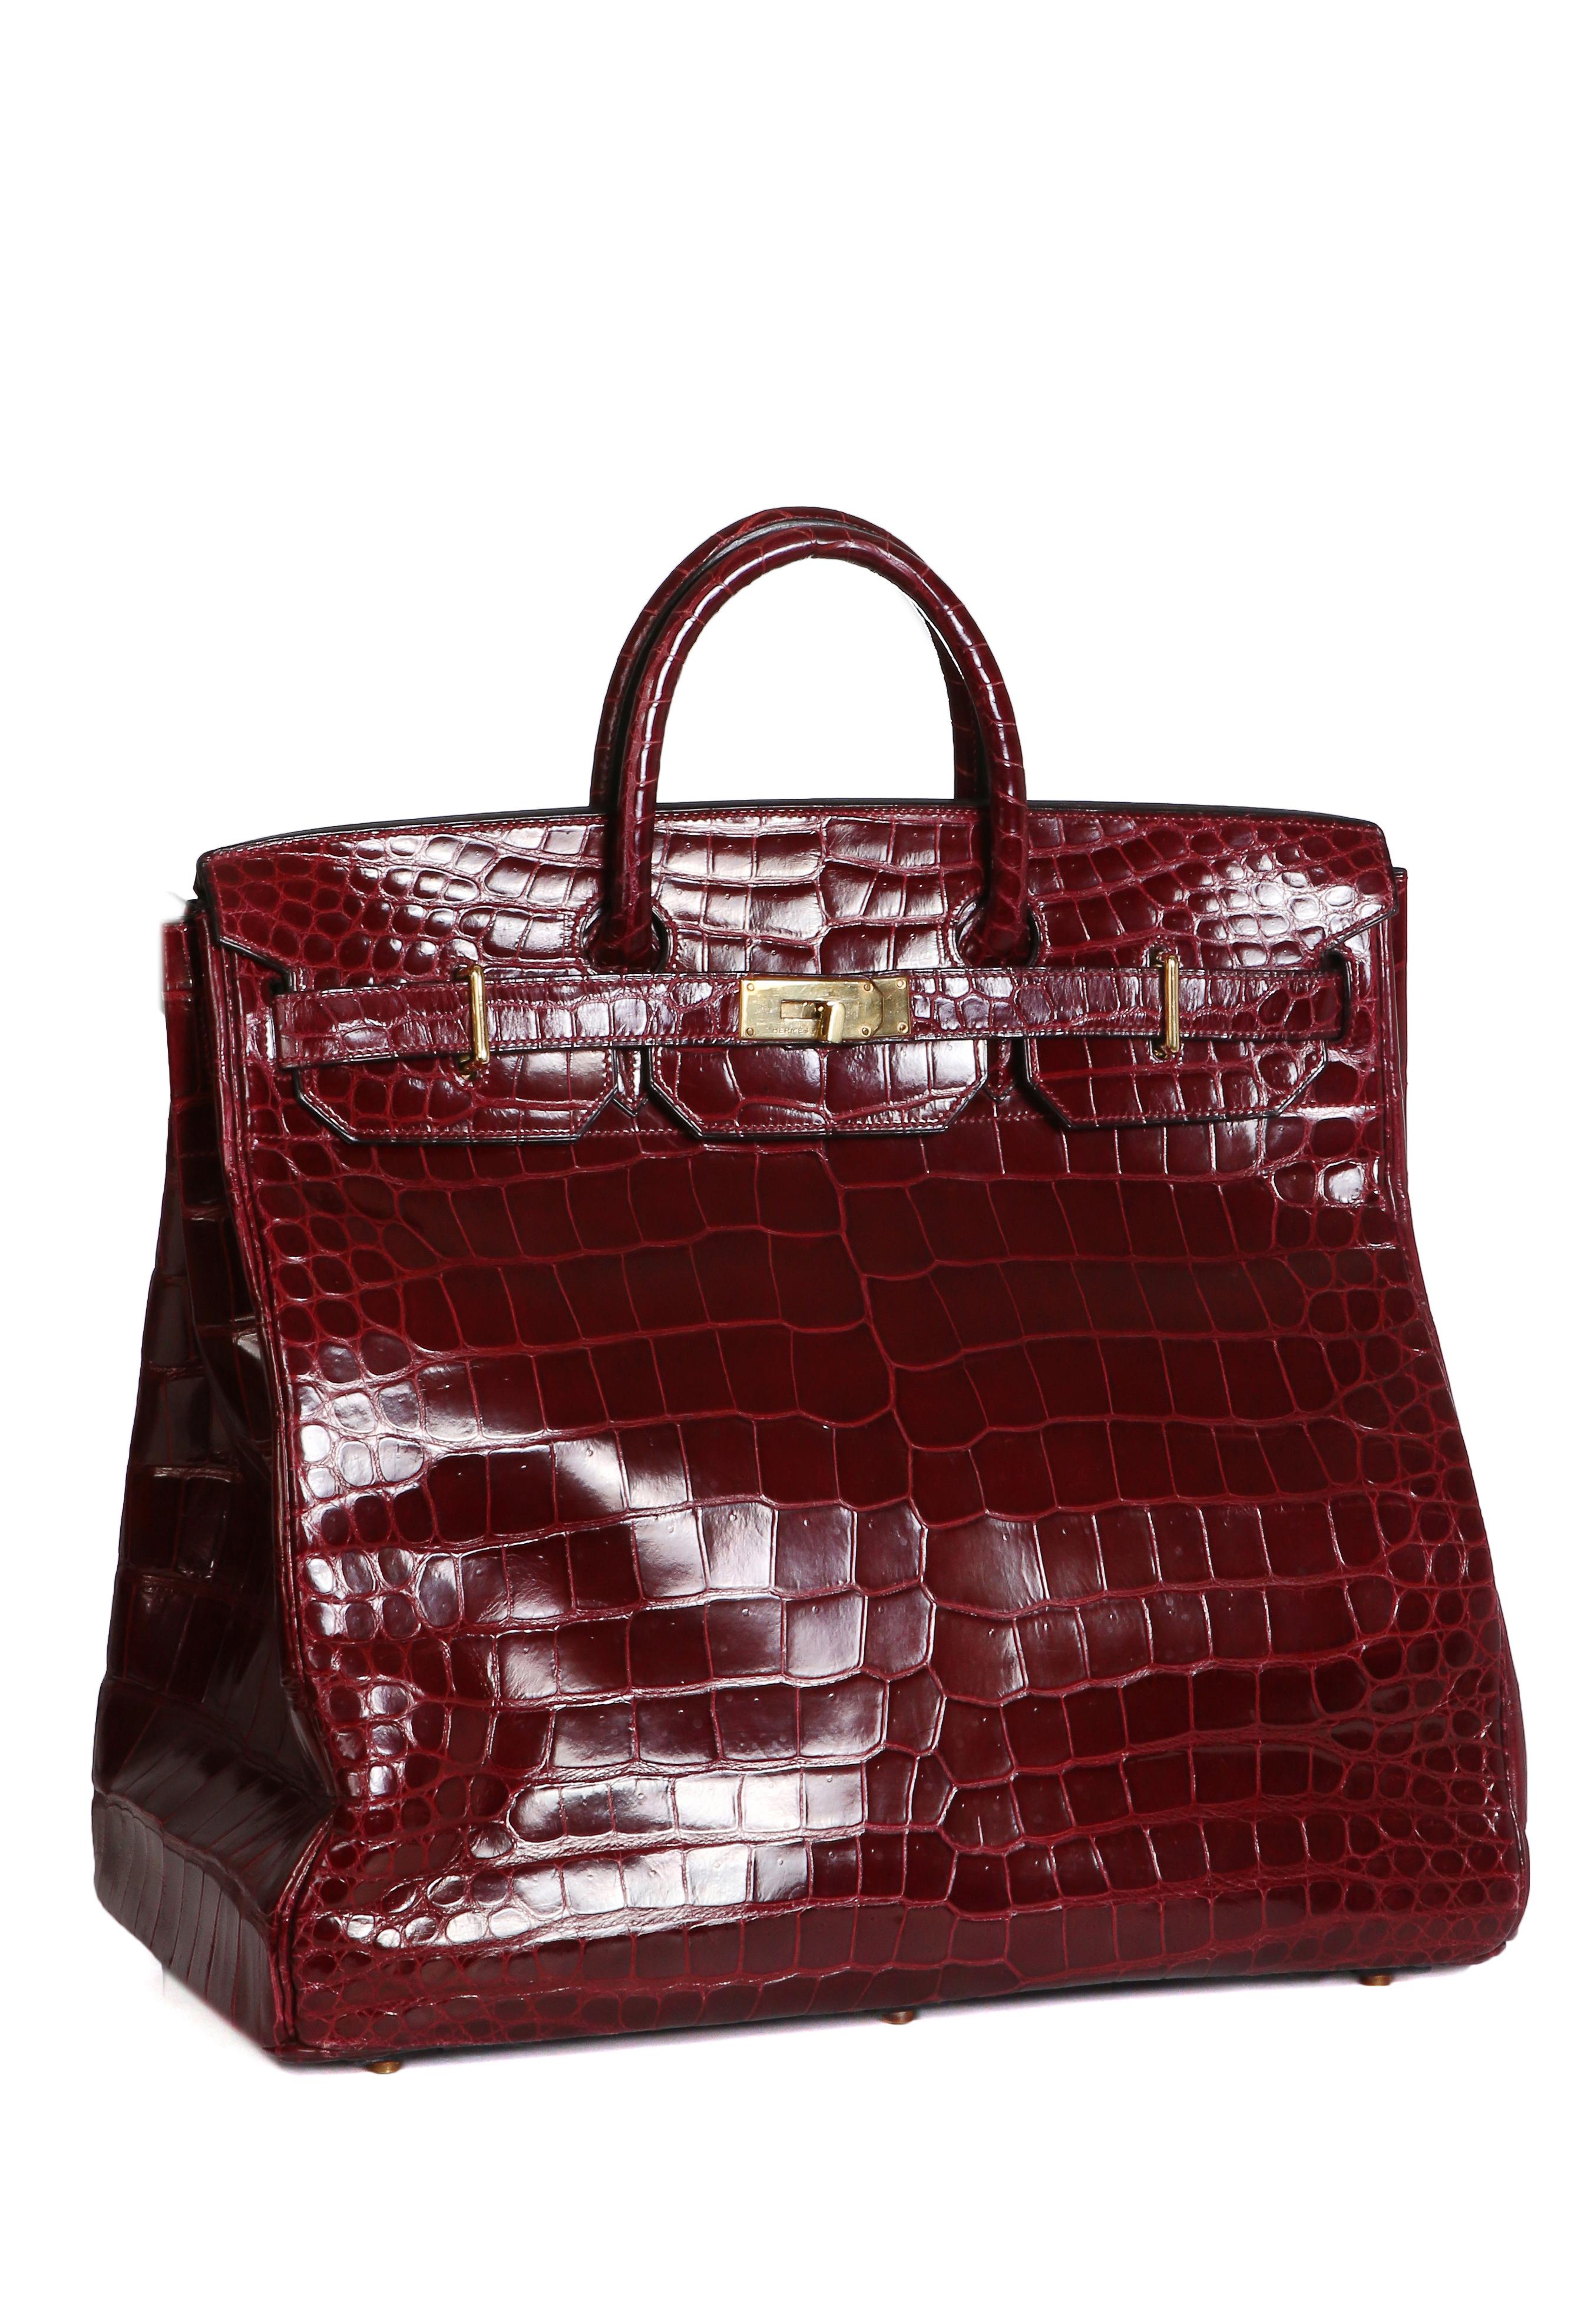 HAC travel Birkin by Hermes from 1972
Burgundy croc skin with gold hardware
Dimensions:  17.5